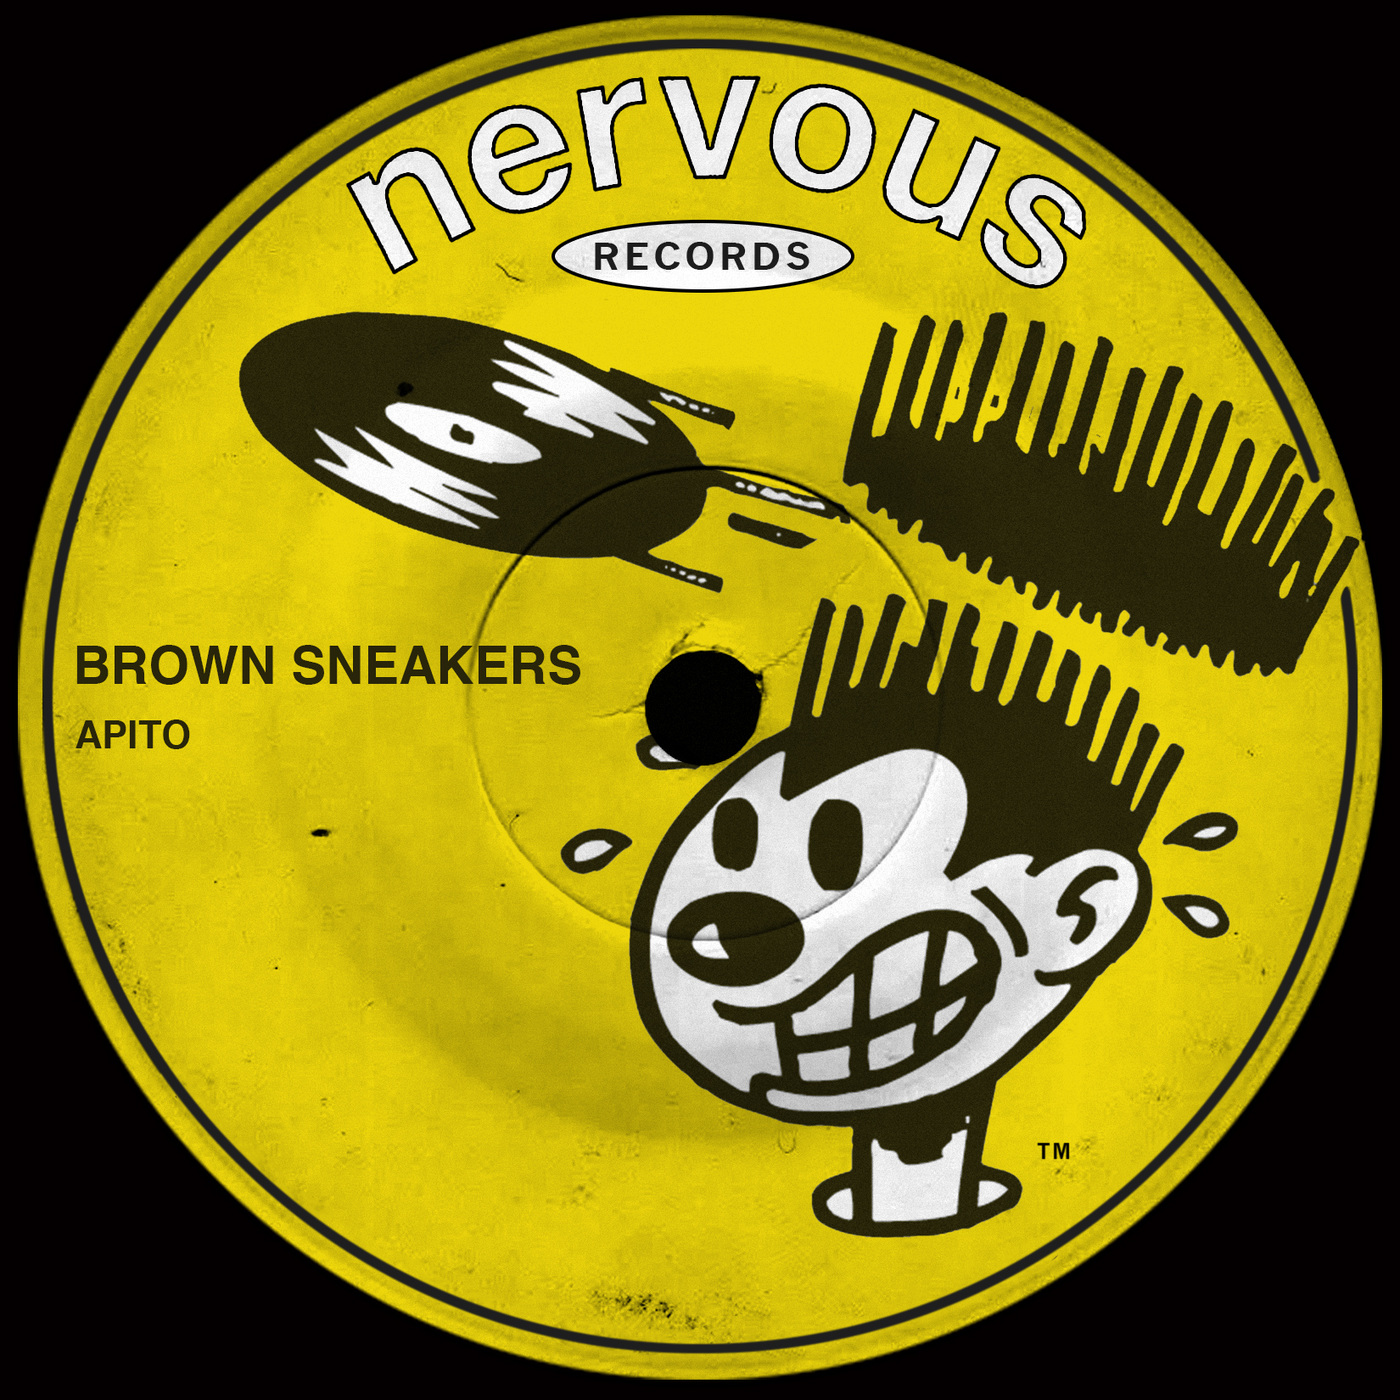 Brown Sneakers - Apito / Nervous Records